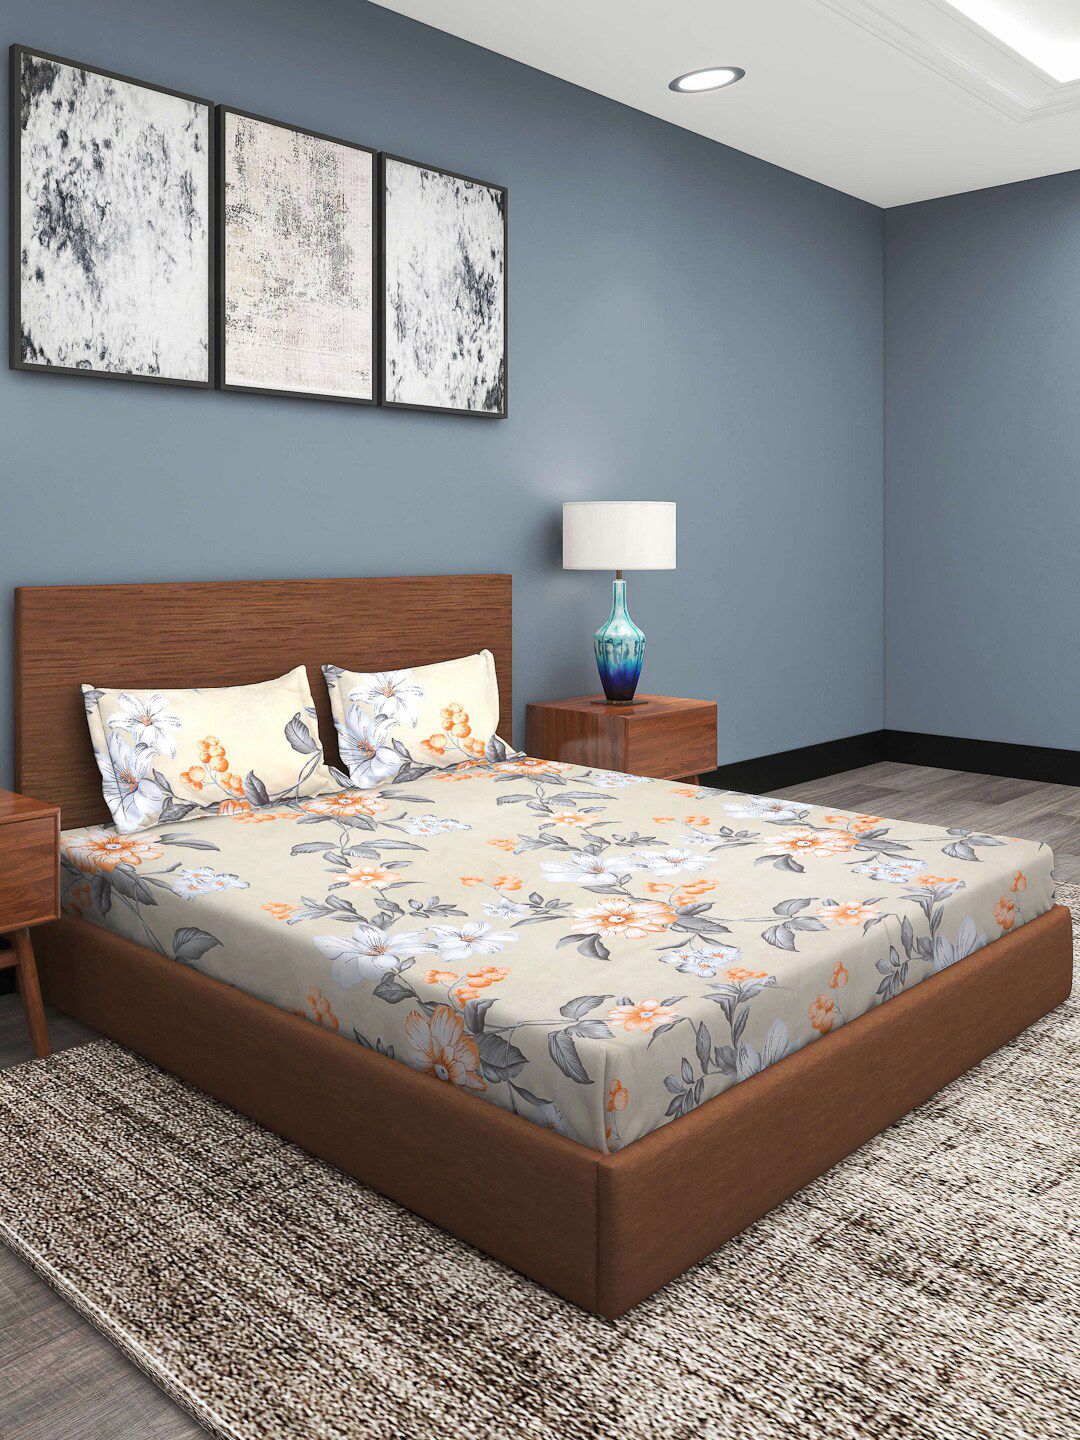 ROMEE Beige & Grey Floral Printed 210 TC King Bedsheet with 2 Pillow Covers Price in India